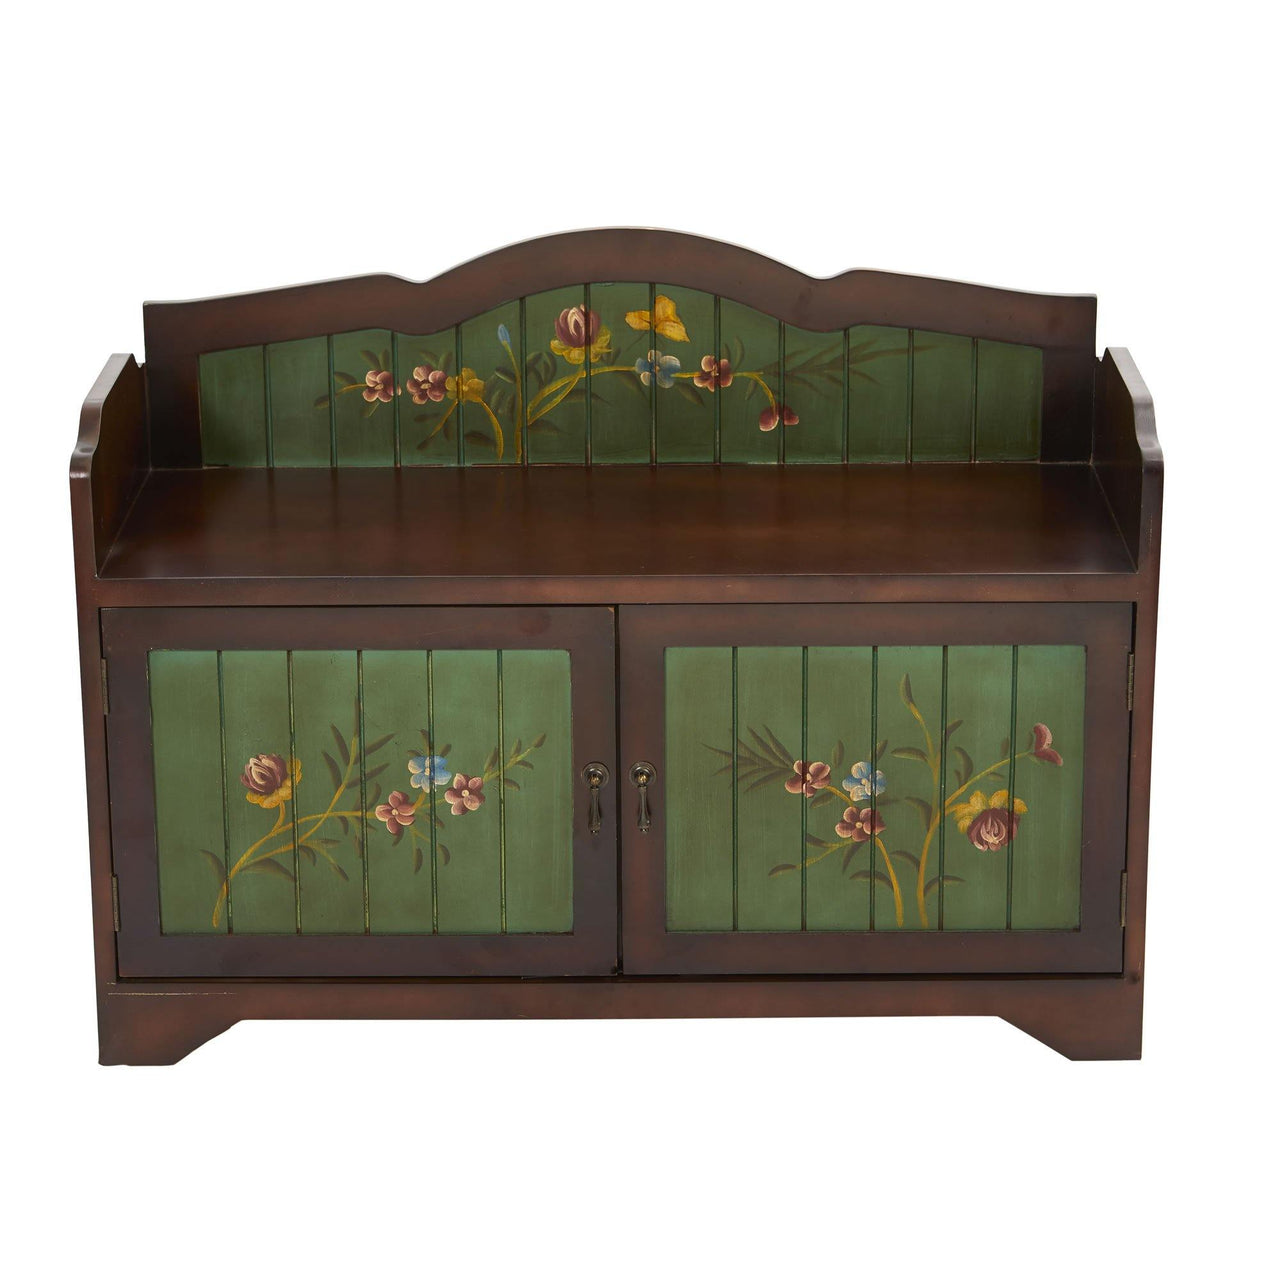 36’’ Antique Floral Art Bench With Drawers - The Fox Decor